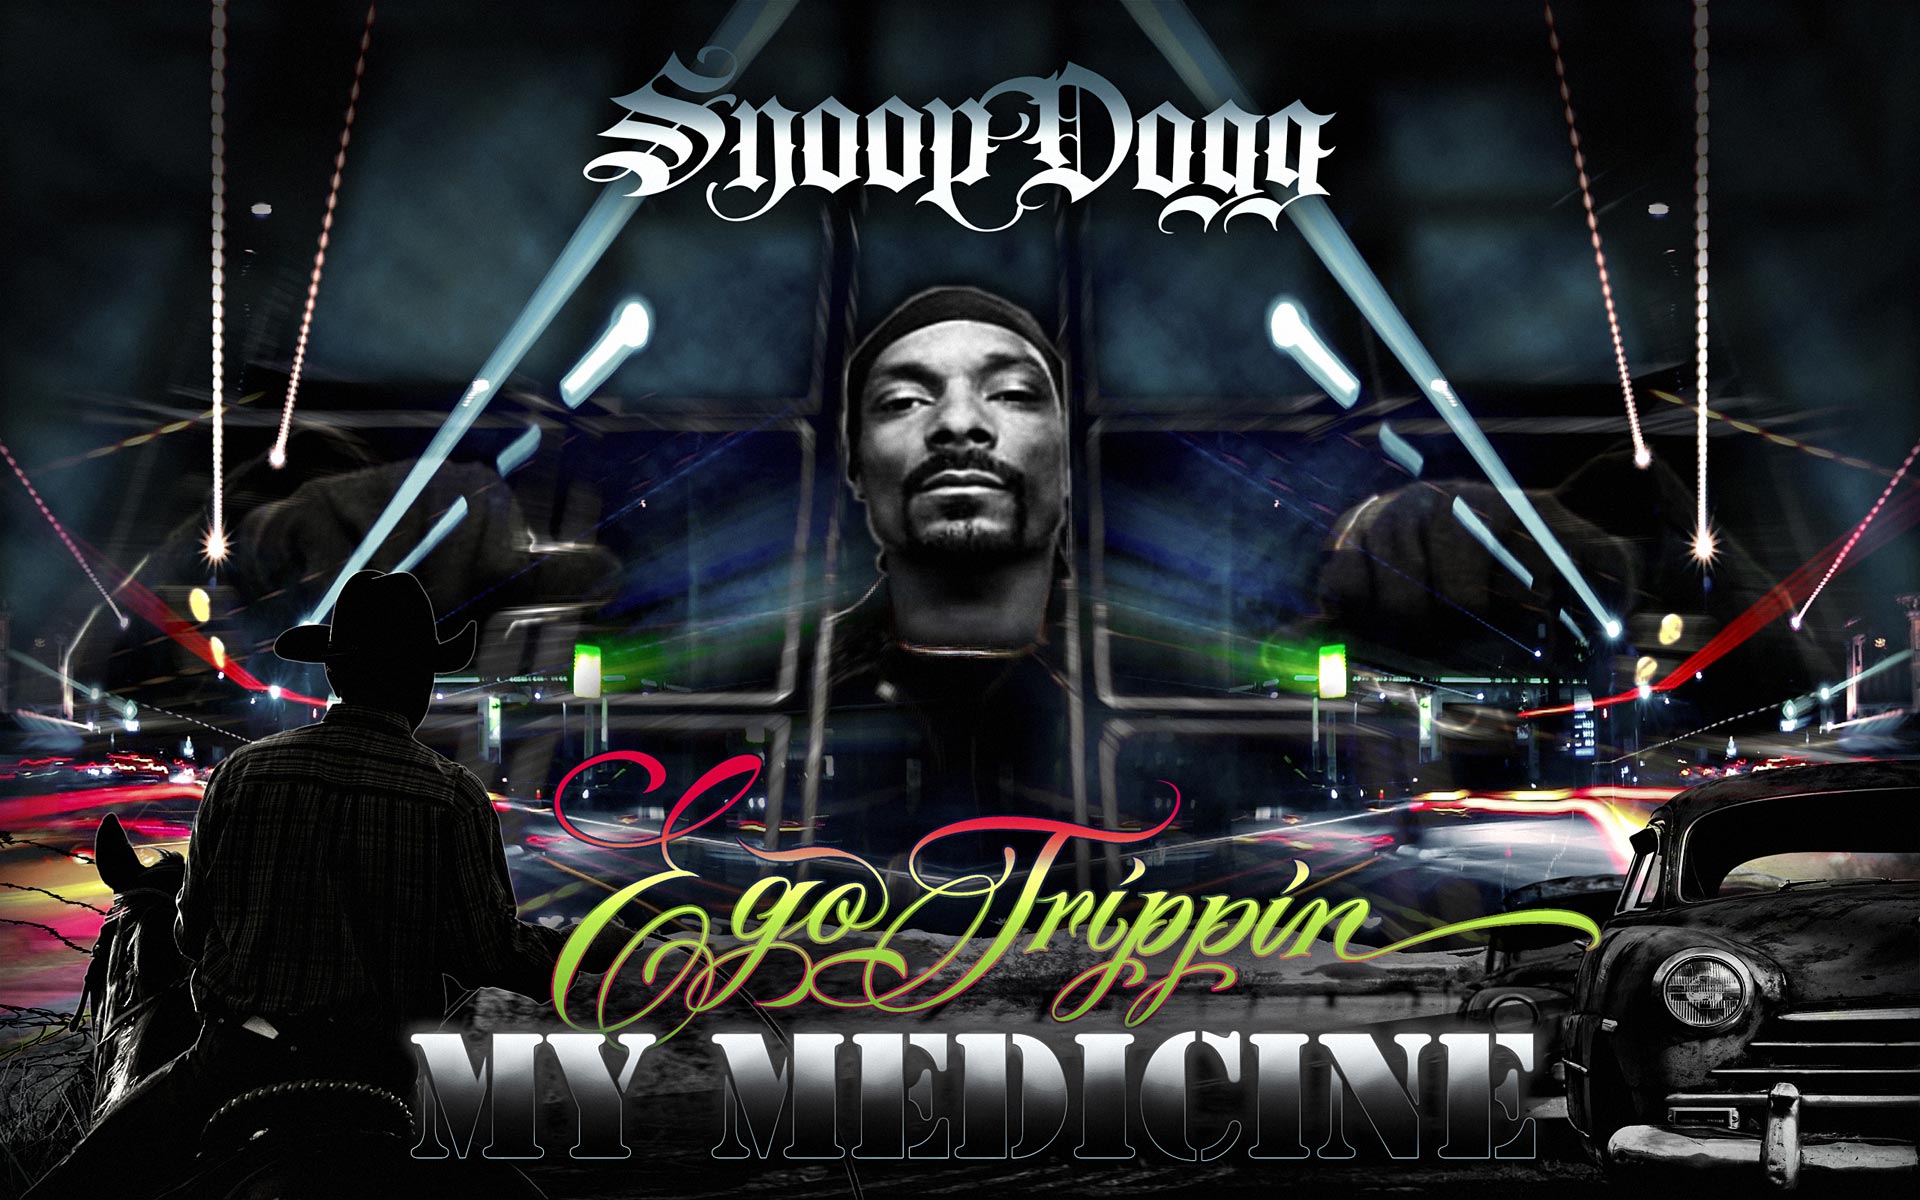 snoop dogg HD wallpapers backgrounds